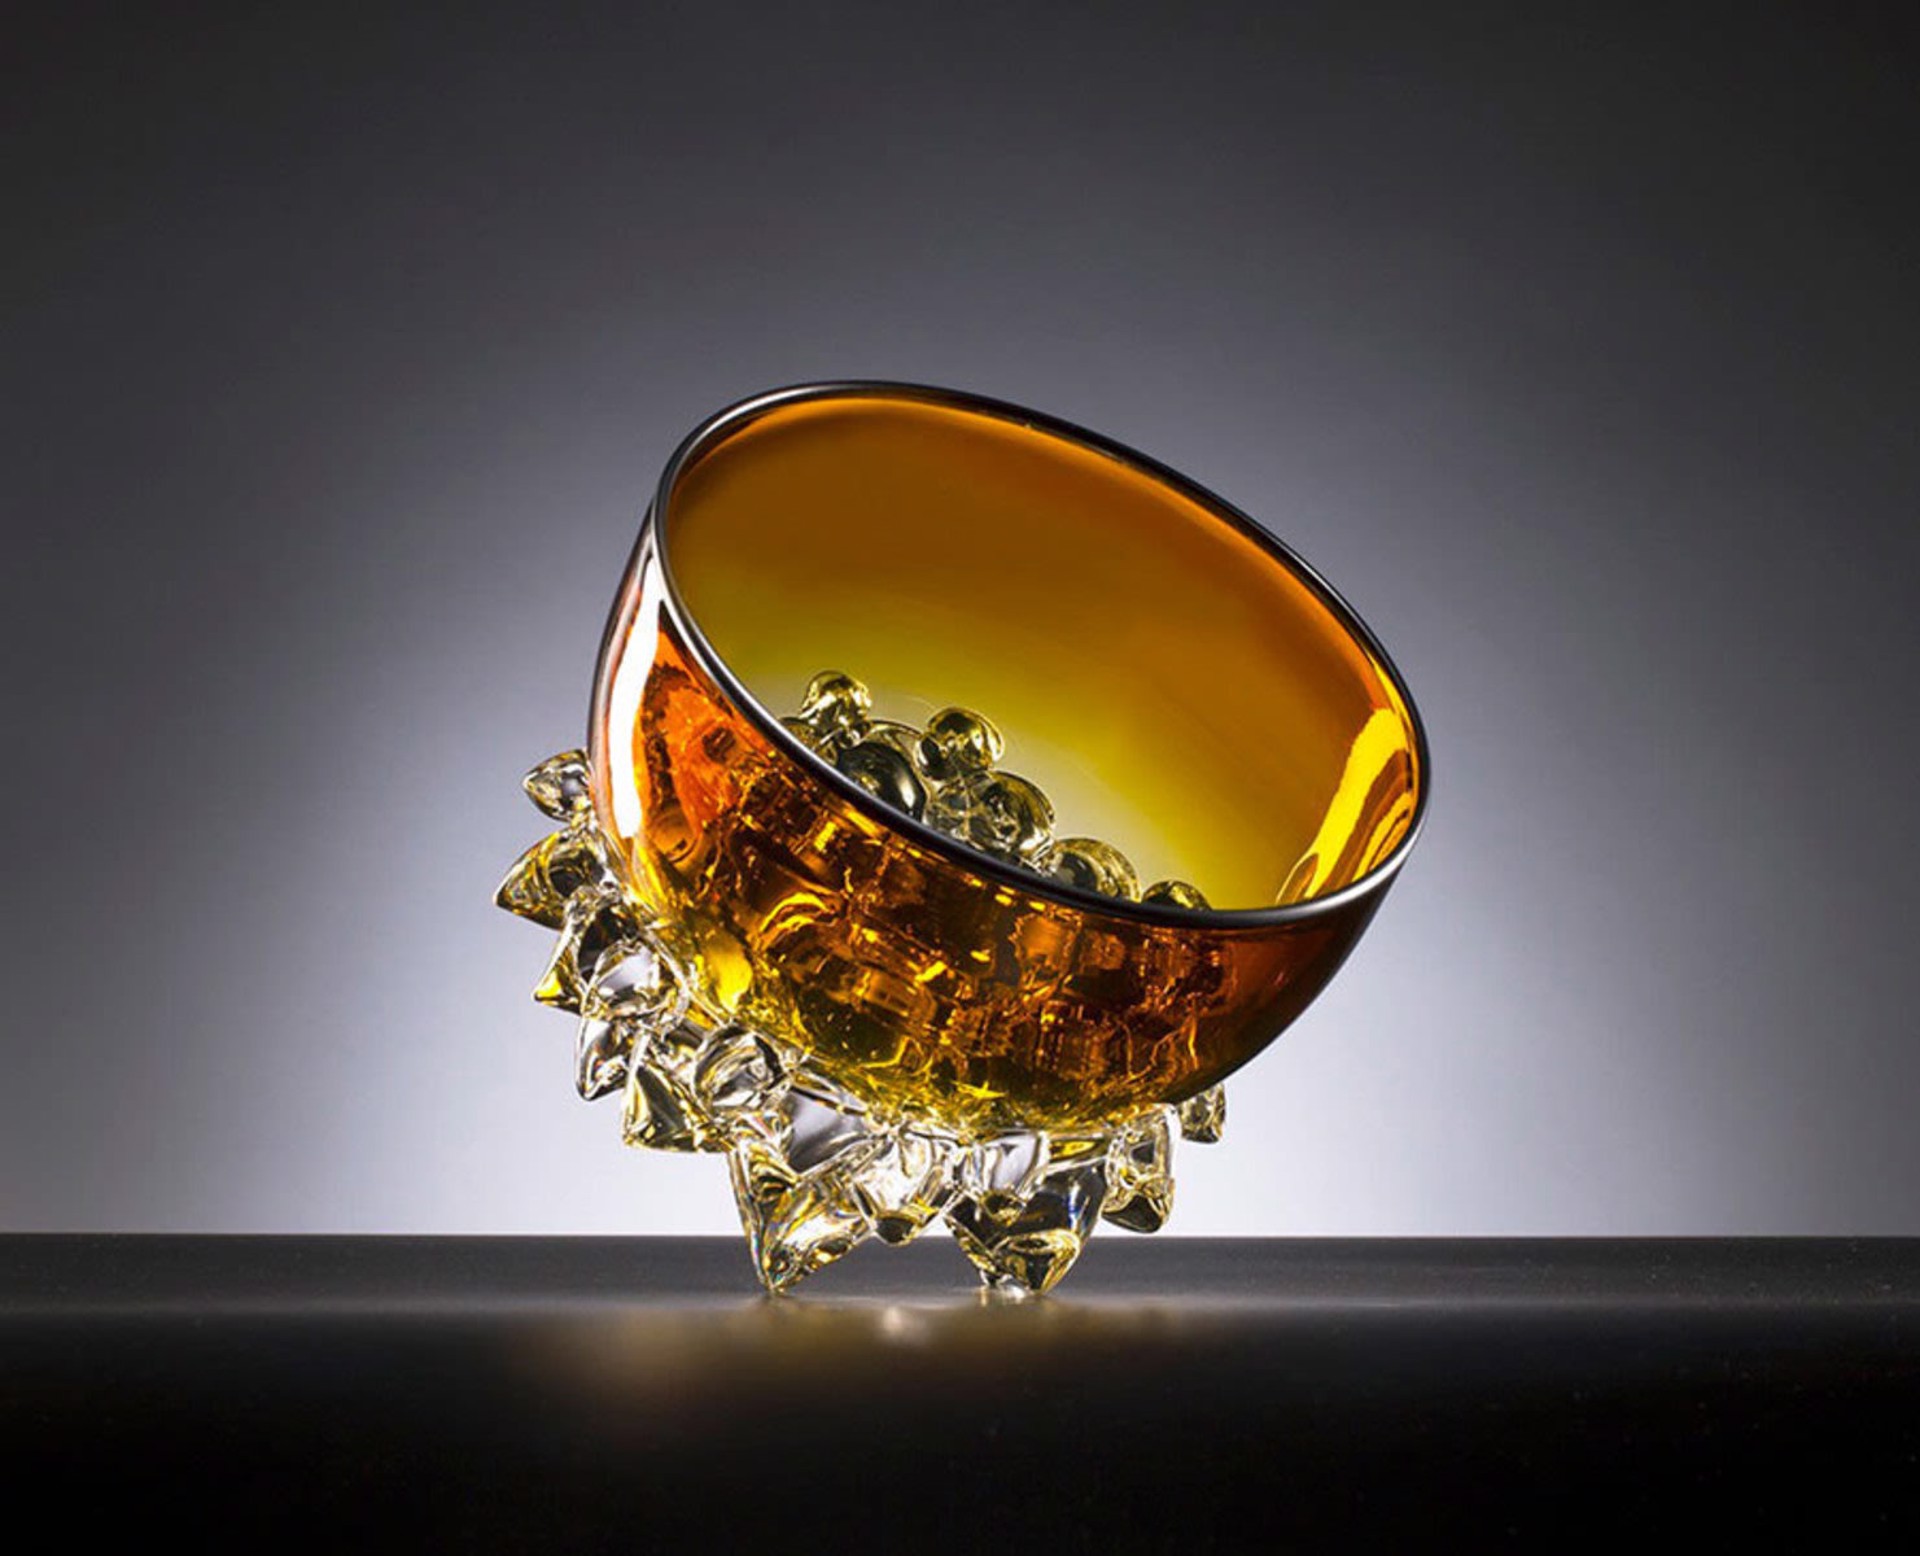 Thorn Vessel Gold Topaz by Andrew Madvin